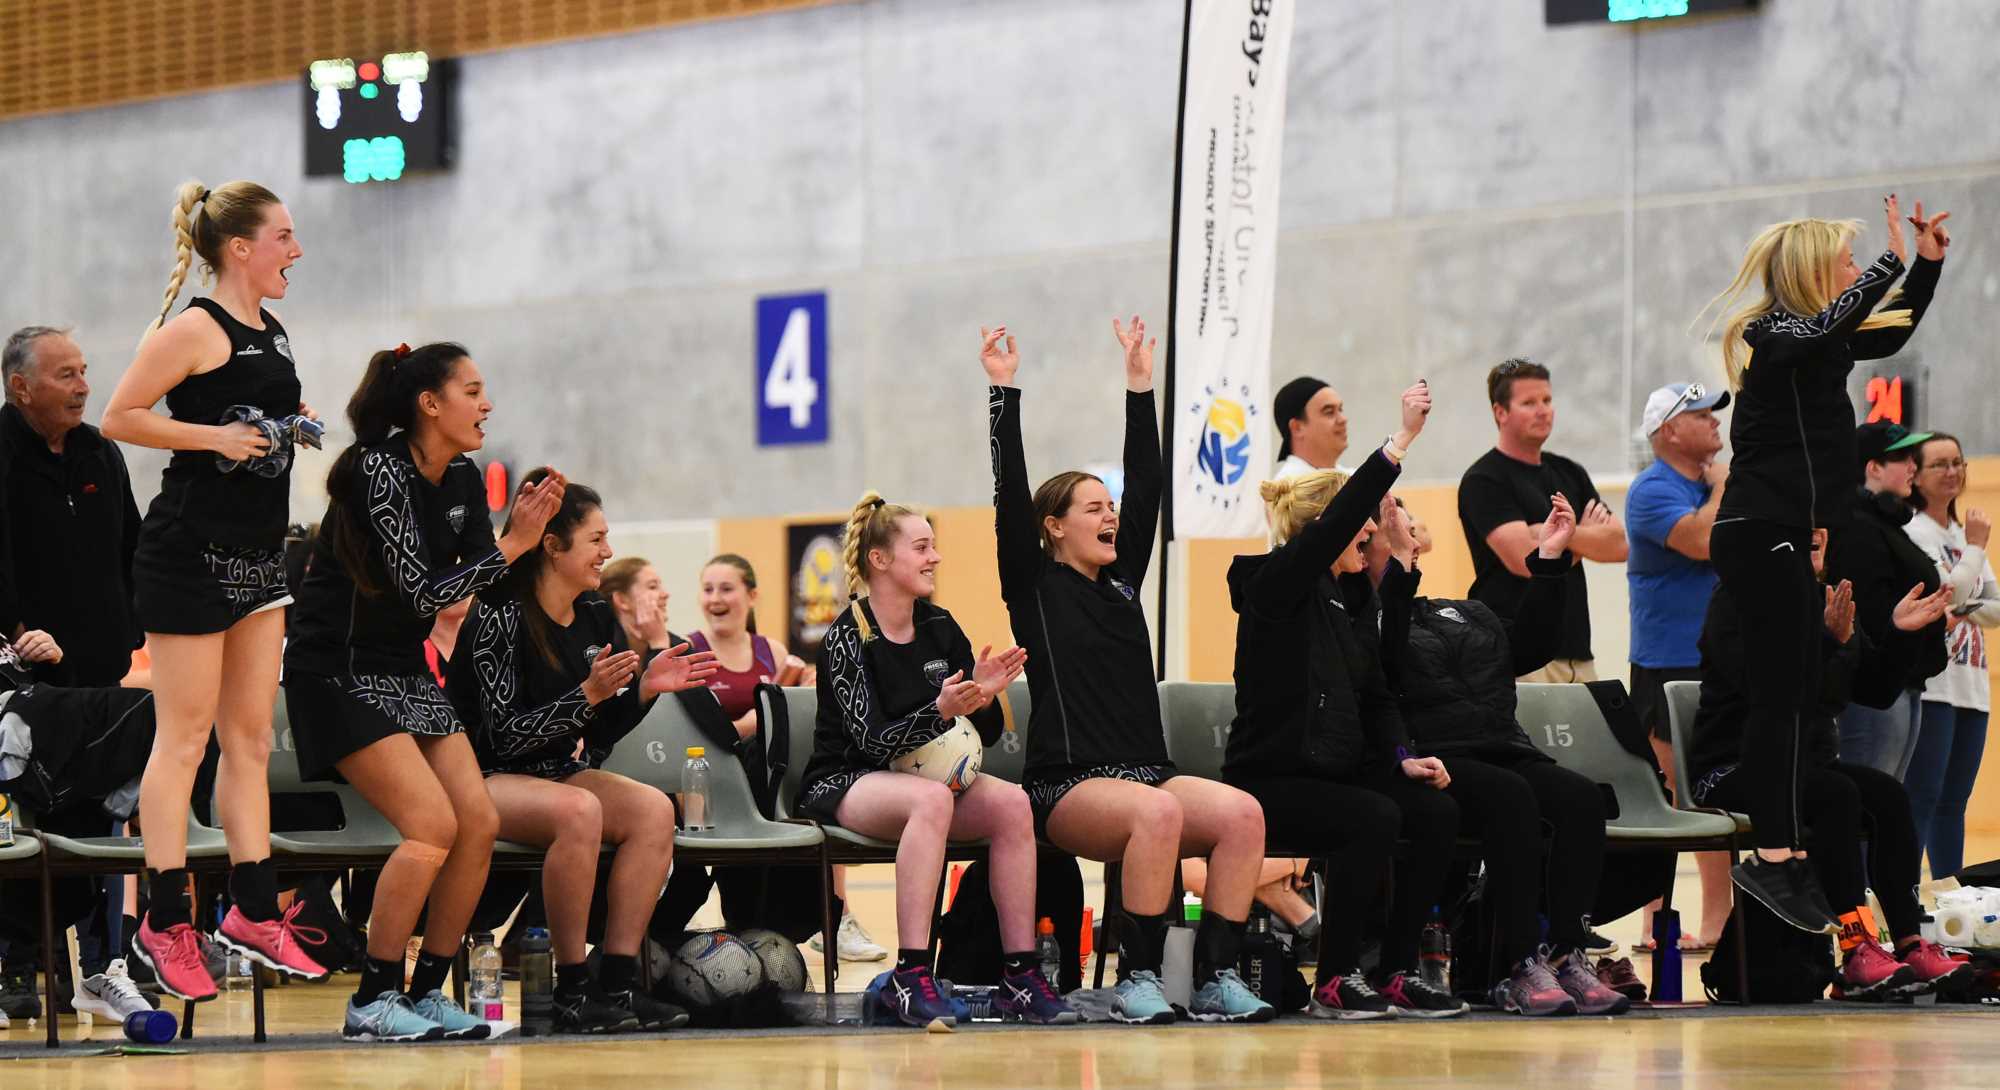 NELSON, NEW ZEALAND - AUGUST 31: Premiership Netball Final - Jacks OPD v Prices Ahurei. Saturday 31 August 2019 in Stoke, New Zealand. (Photo by Chris Symes/Shuttersport Limited)